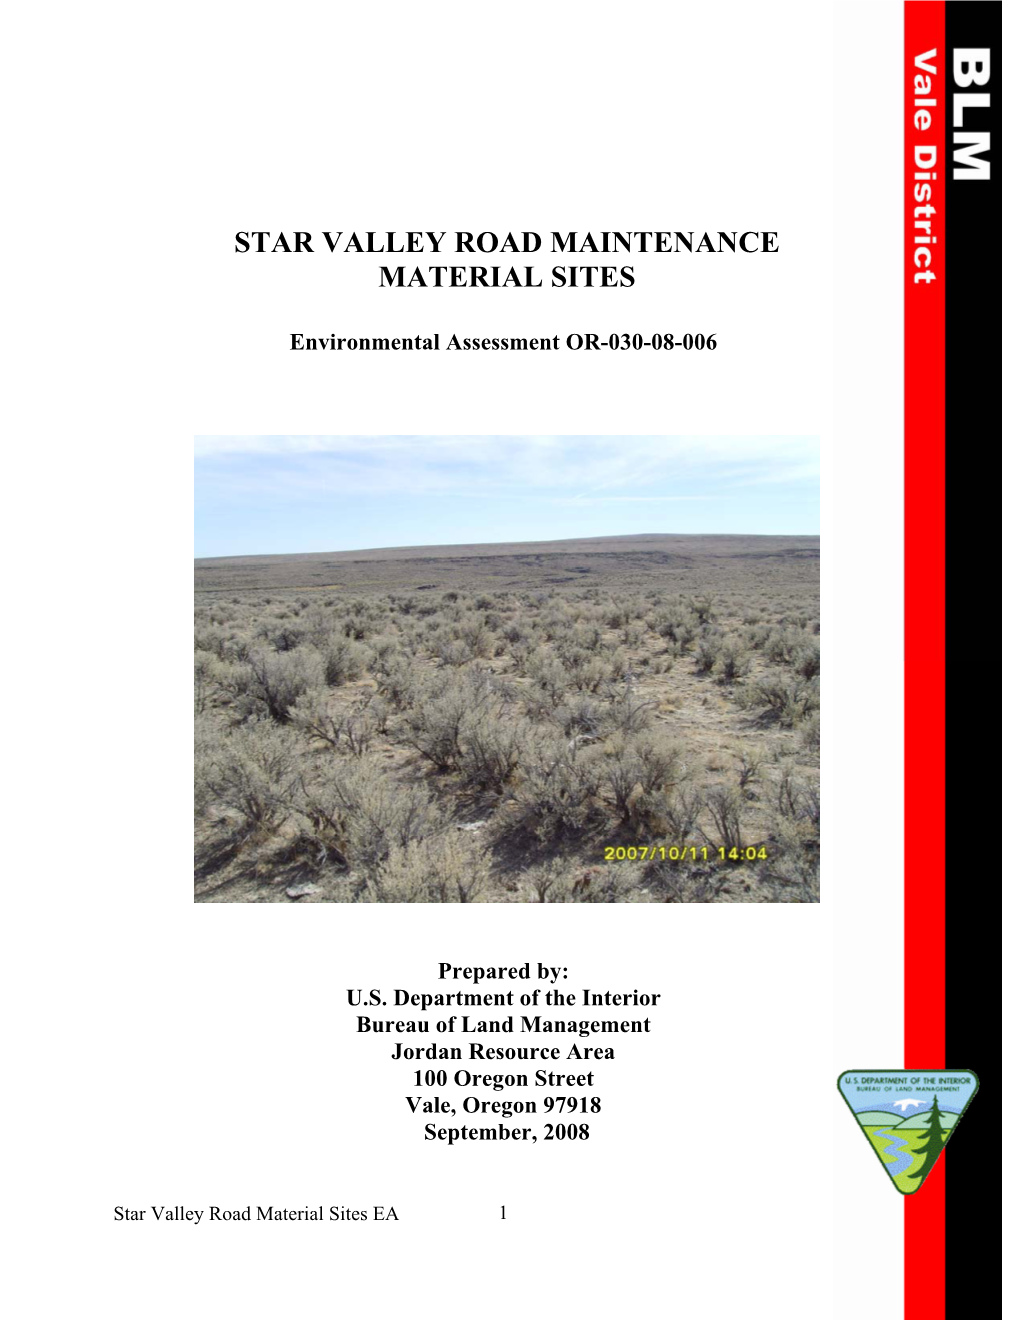 Star Valley Road Material Sites EA 1